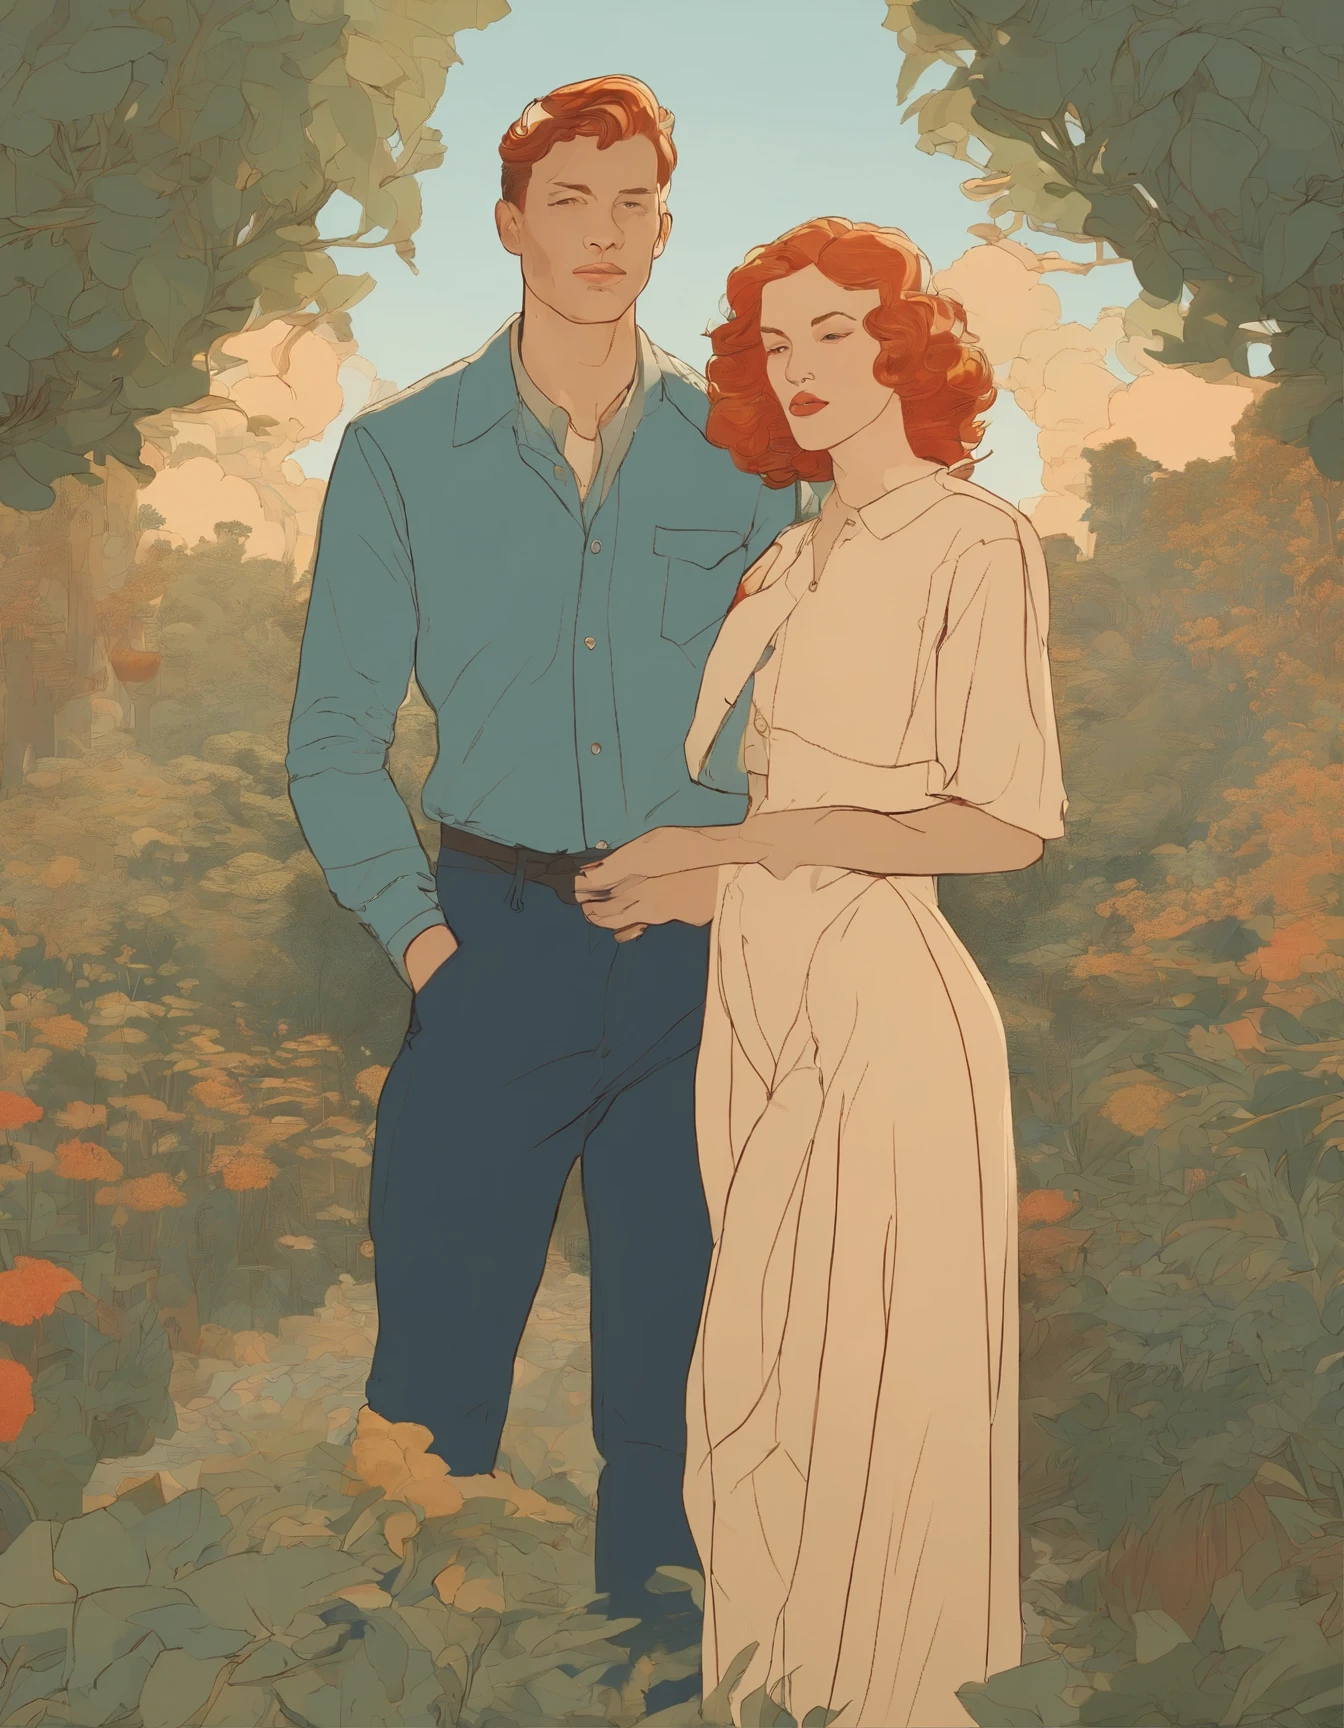 illustration of a woman and a man standing in a garden, concept art by James Jean, trending on pixiv, art nouveau, botticelli and victo ngai, laurie greasley and james jean, james jean marc, james jean art, jordan grimmer and james jean, james jean and victo ngai, brittney lee